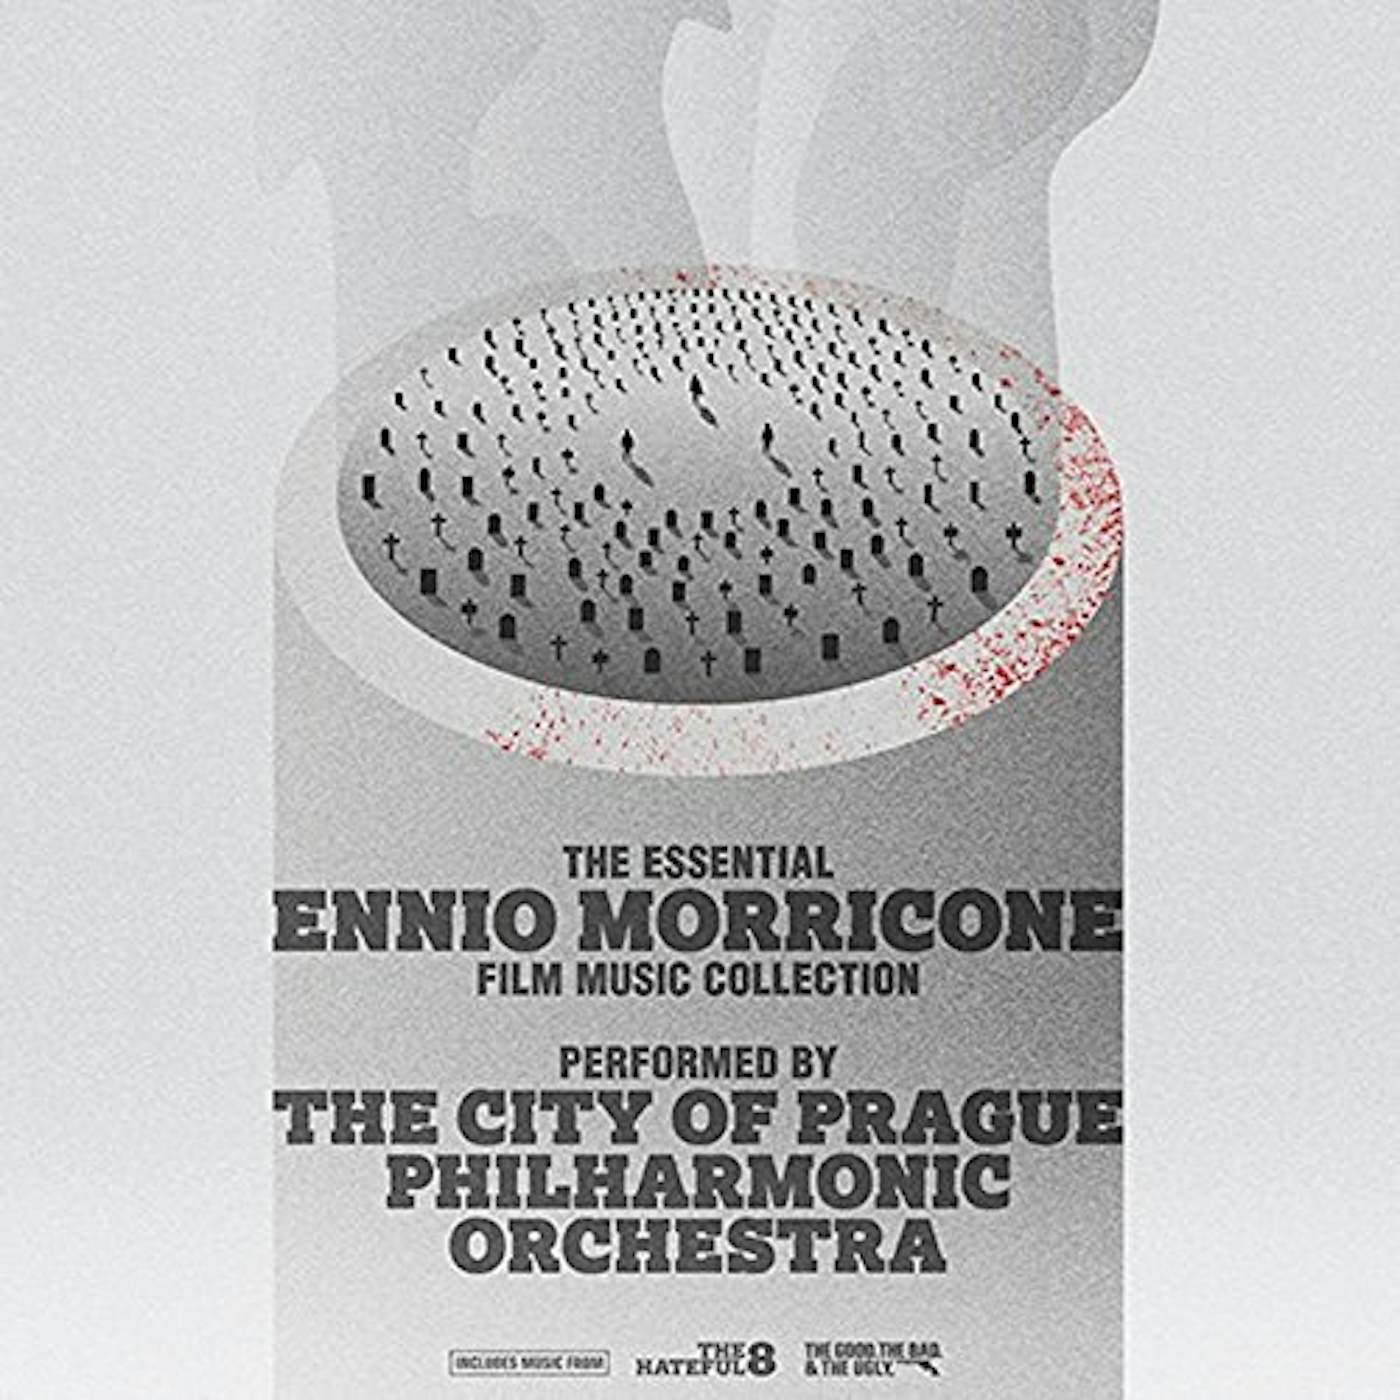 The City of Prague Philharmonic Orchestra ESSENTIAL ENNIO MORRICONE FILM MUSIC COLLECTION CD